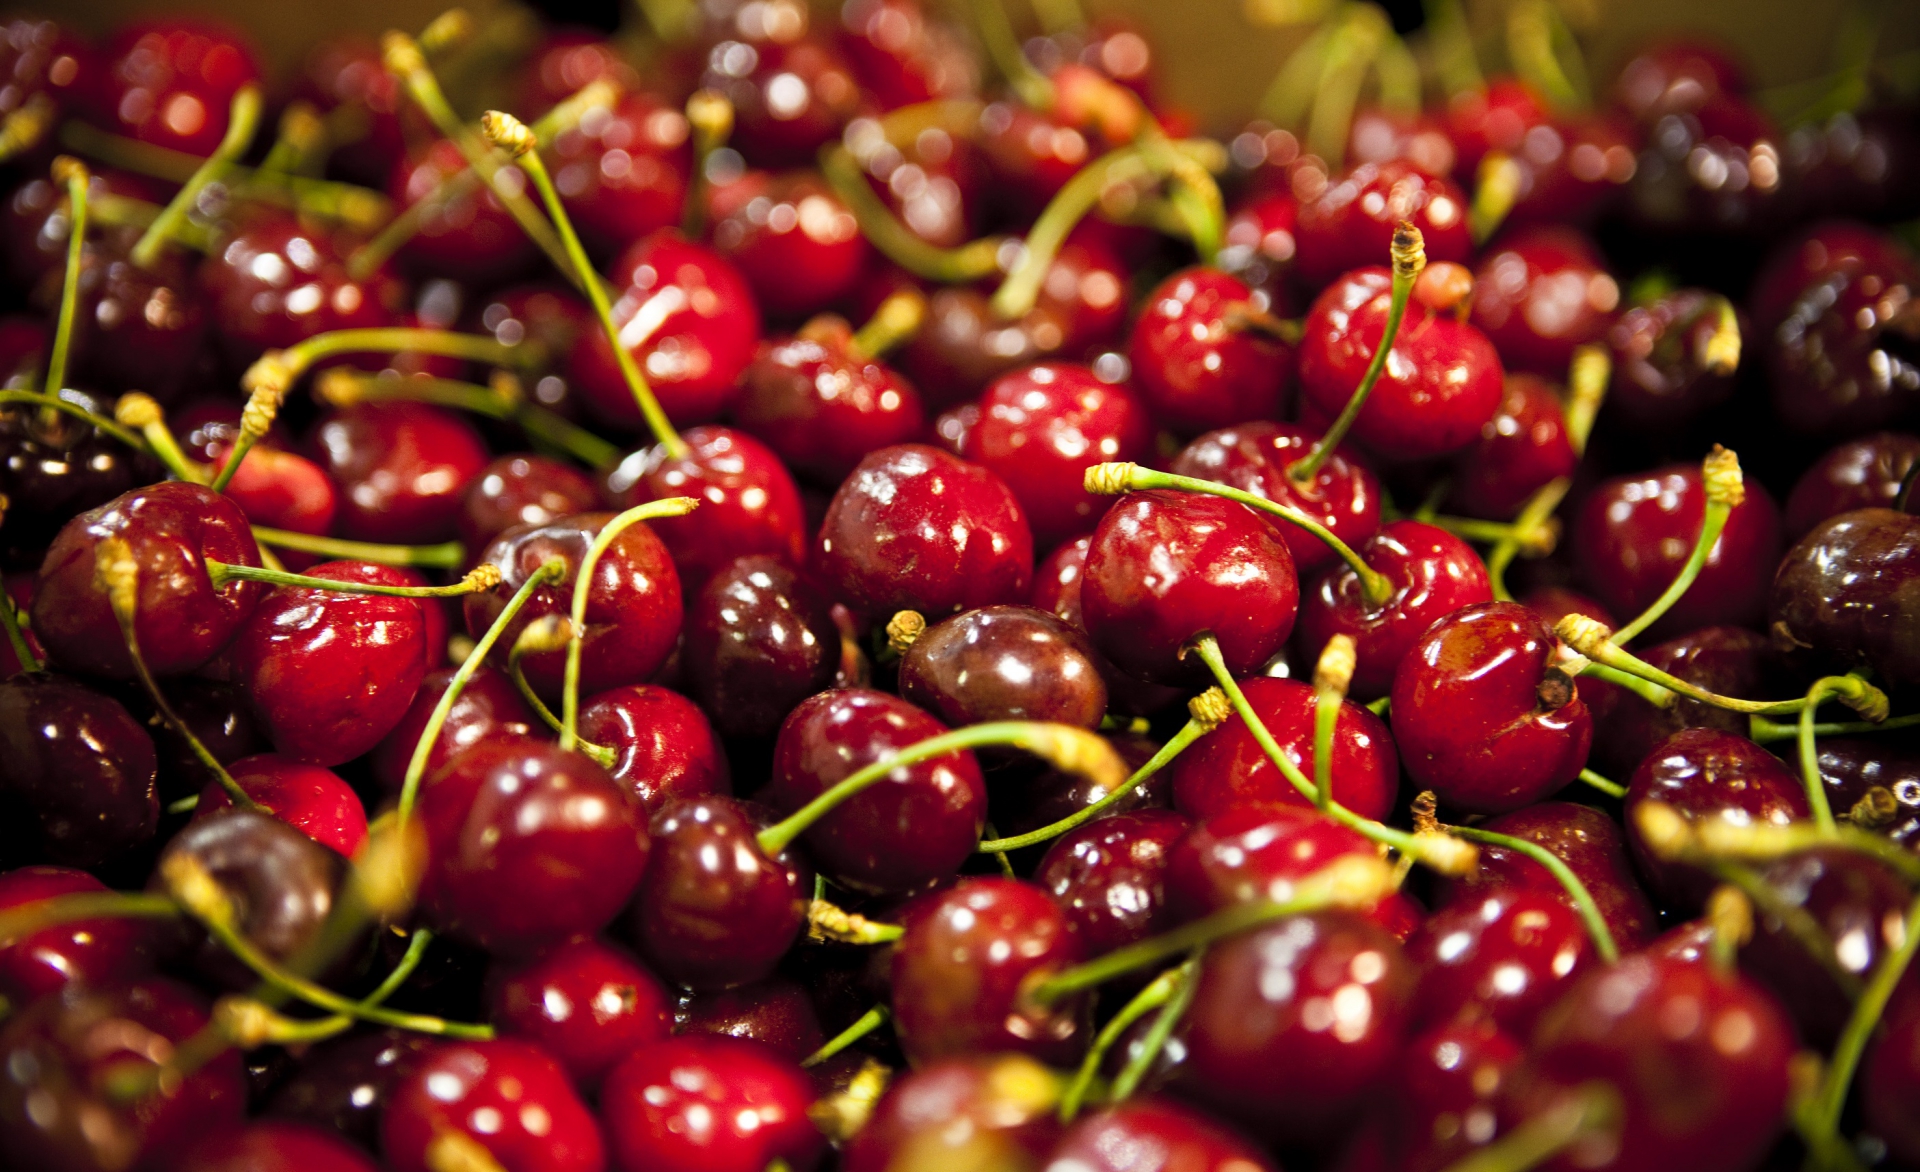 Argentina to export grapes and cherries to Thailand